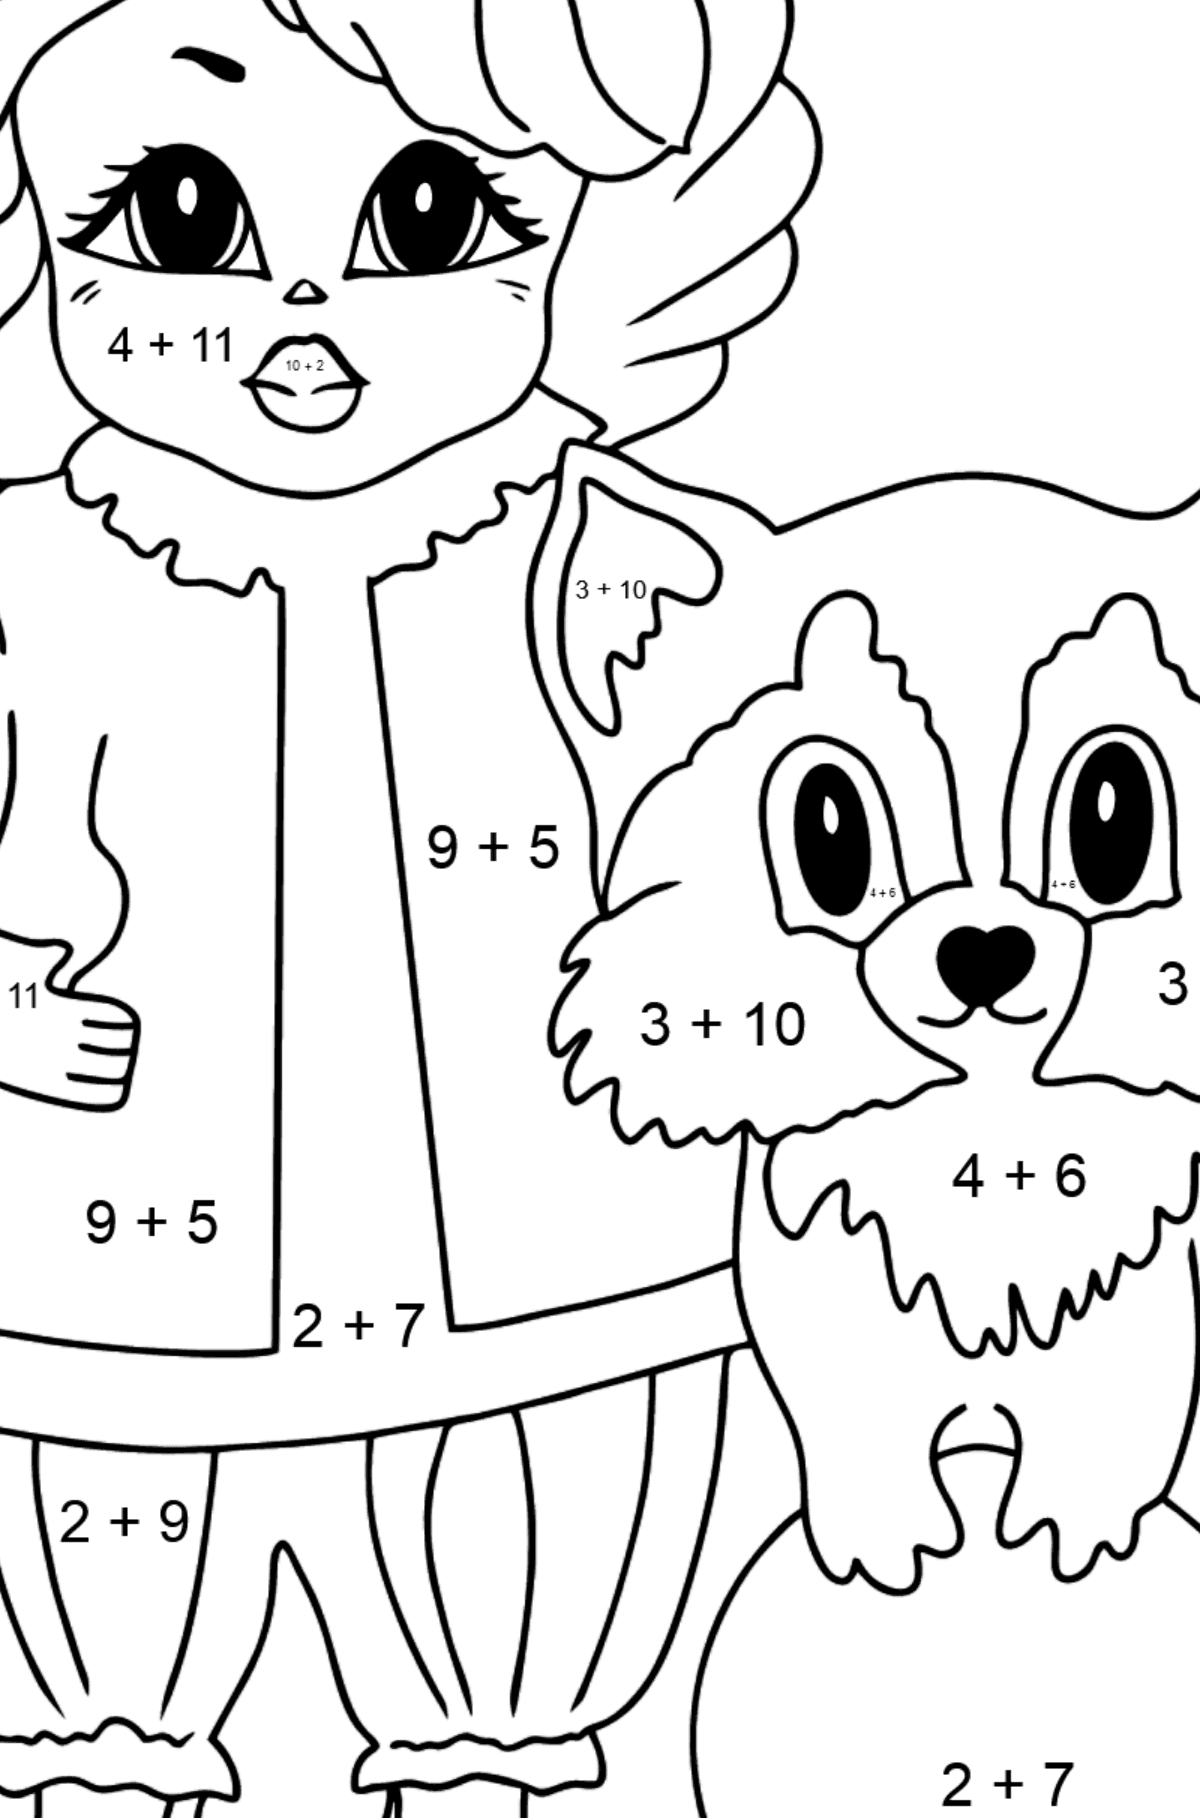 Coloring Picture - A Princess with a Cat and a Racoon - Math Coloring - Addition for Kids